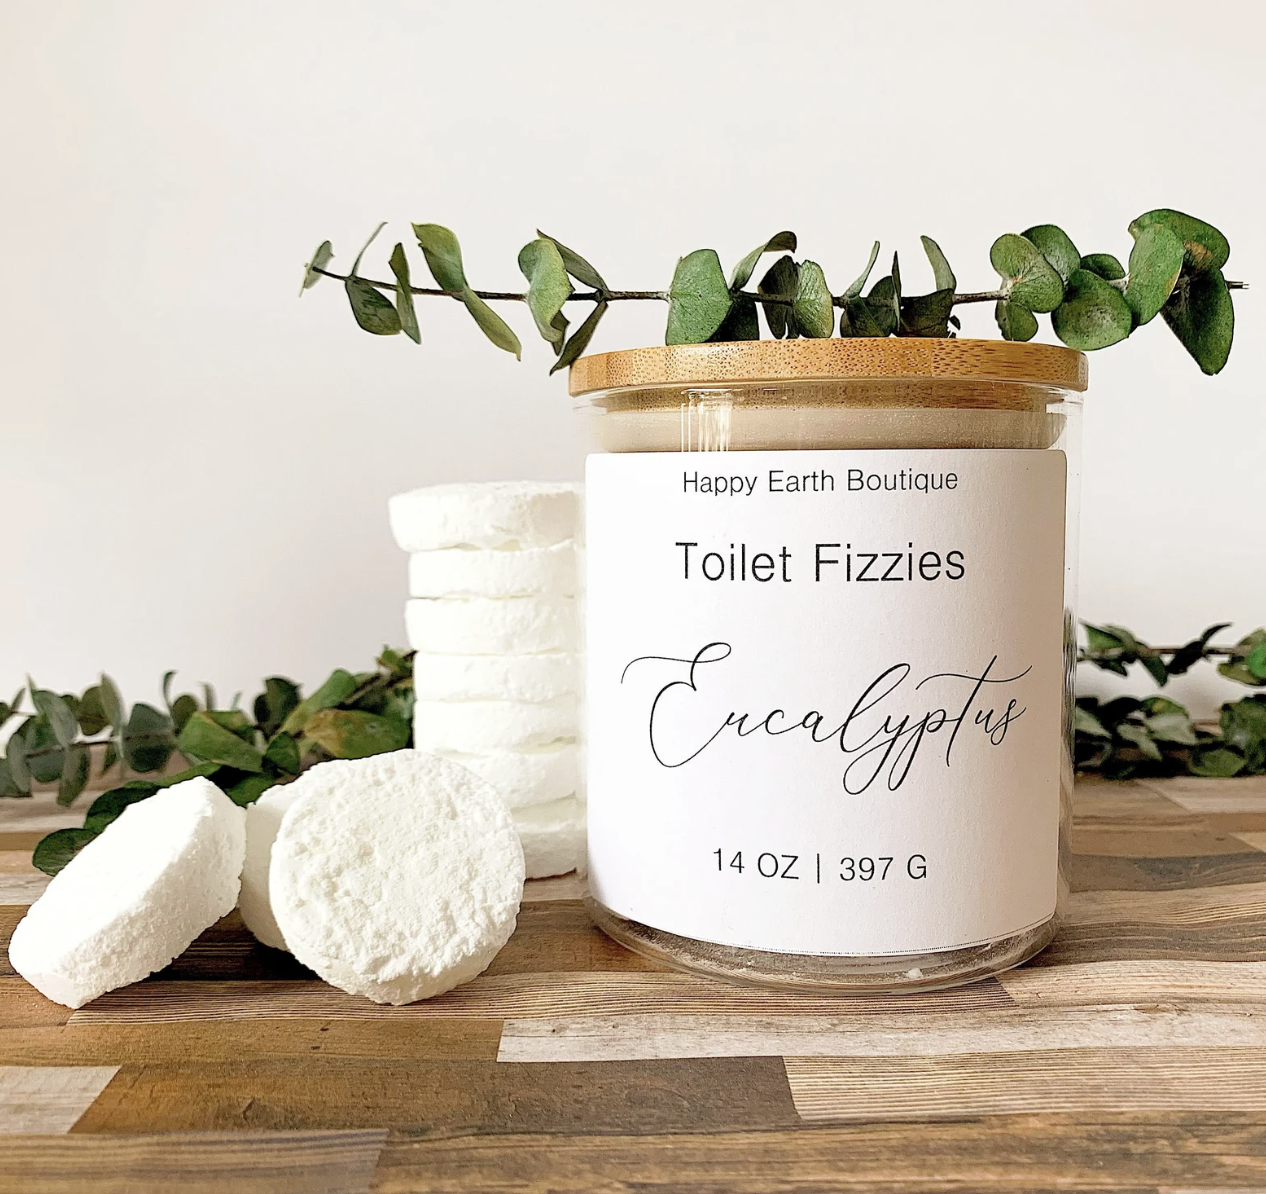 A jar of toilet fizzies with some beside the jar